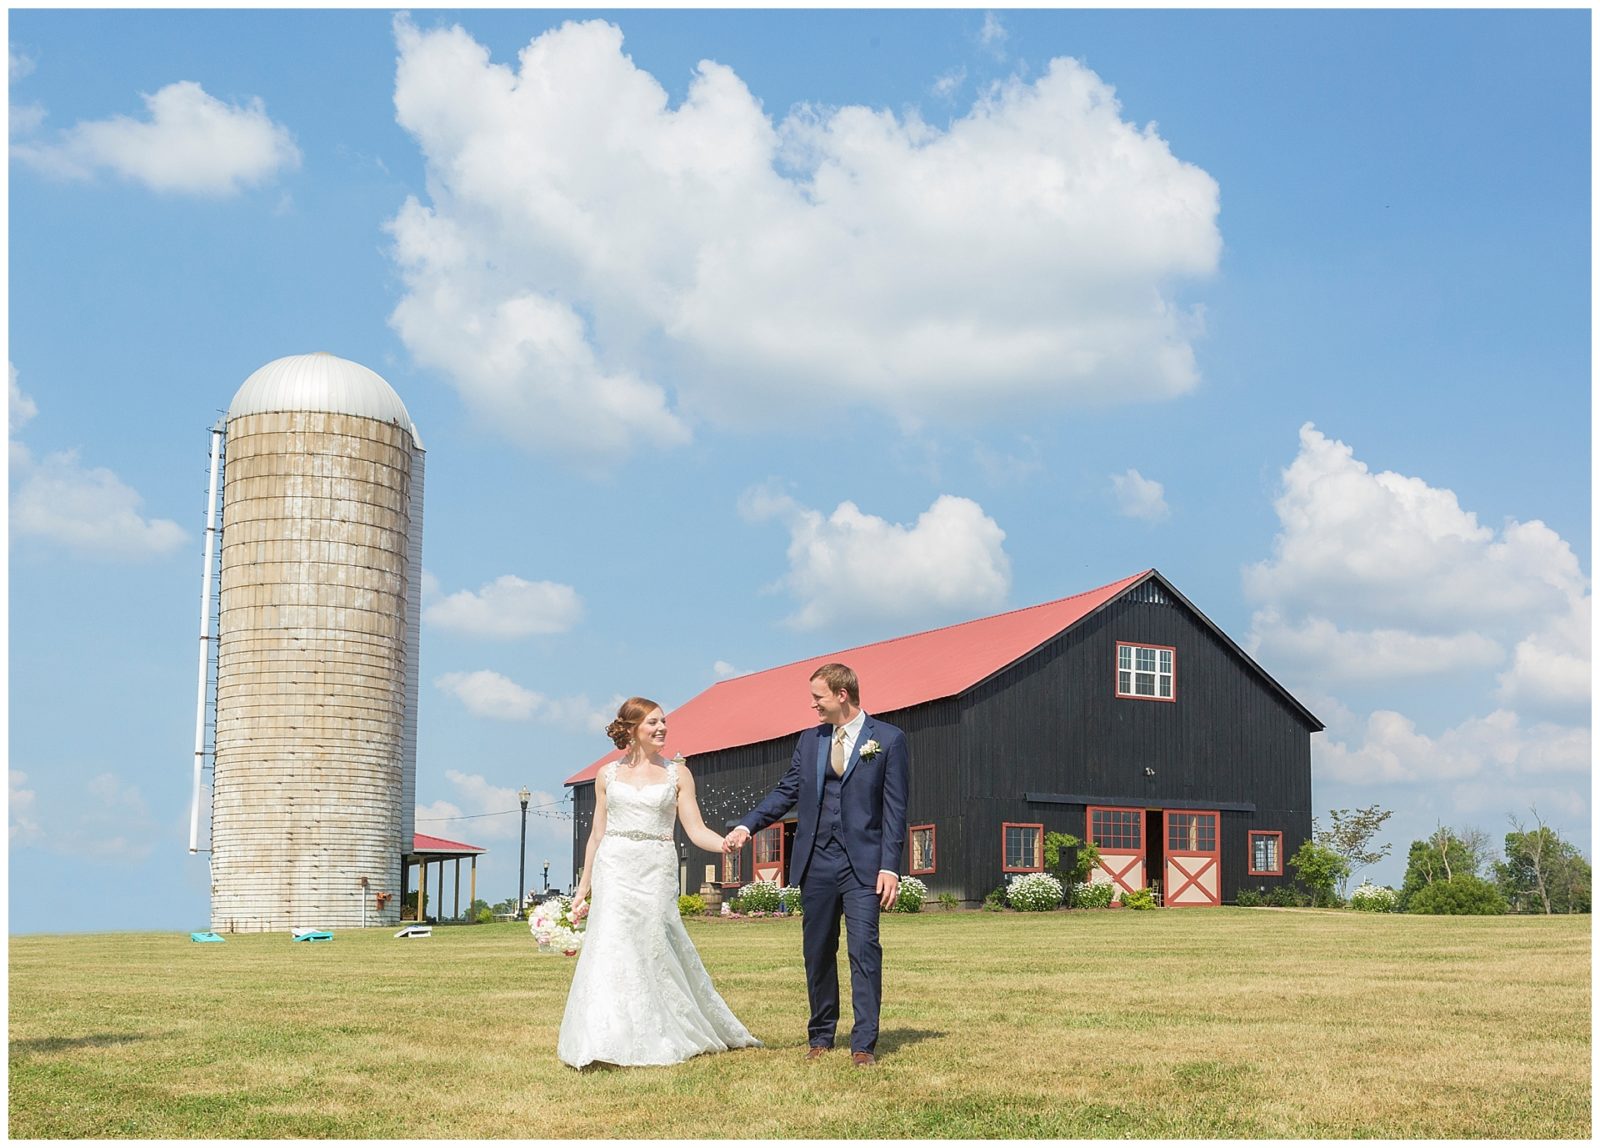 Outdoor summer wedding at the beautiful and rustic Event Barn at Evans Orchard in Georgetown, Kentucky. Wedding Photography by: Kevin and Anna Photography www.kevinandannaweddings.com